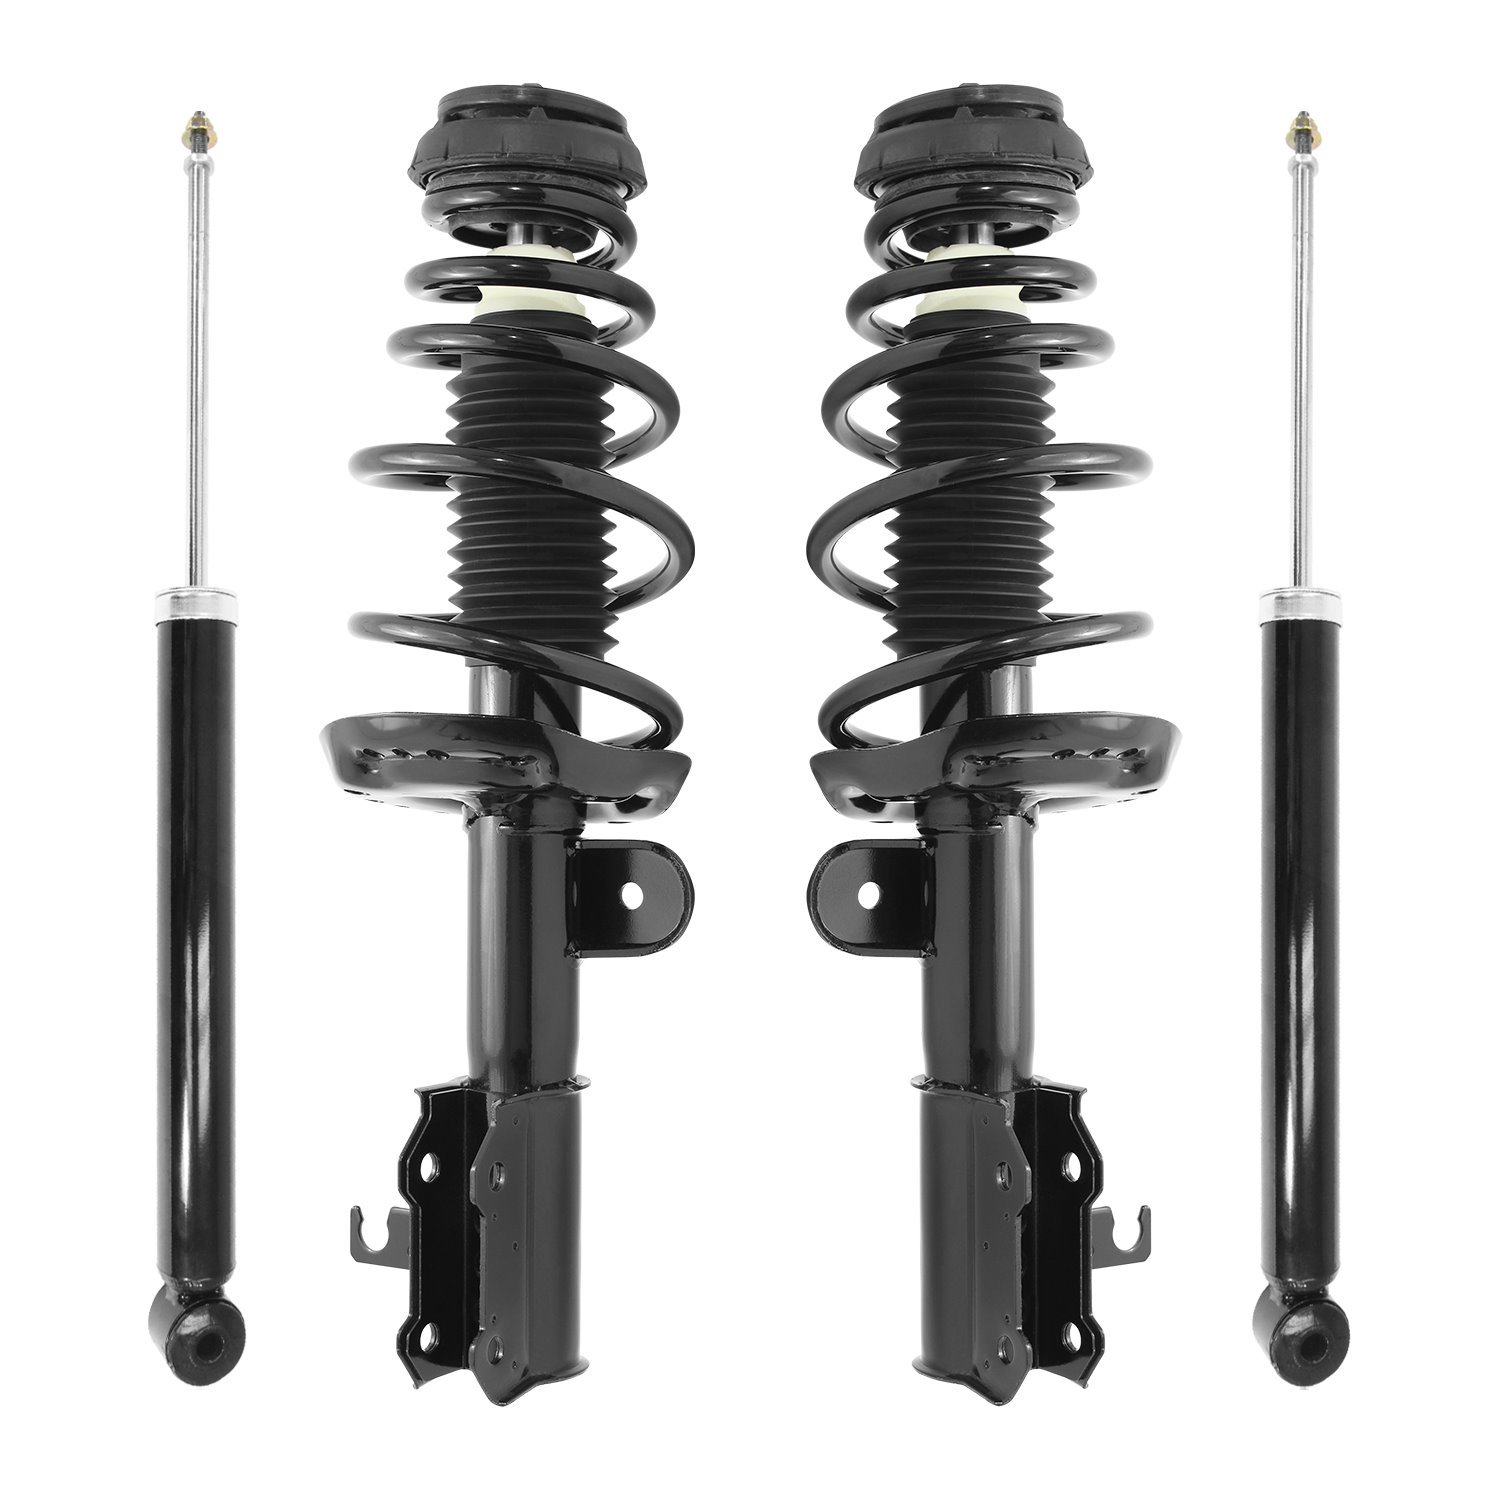 4-11057-251180-001 Front & Rear Suspension Strut & Coil Spring Assembly Fits Select Chevy Volt